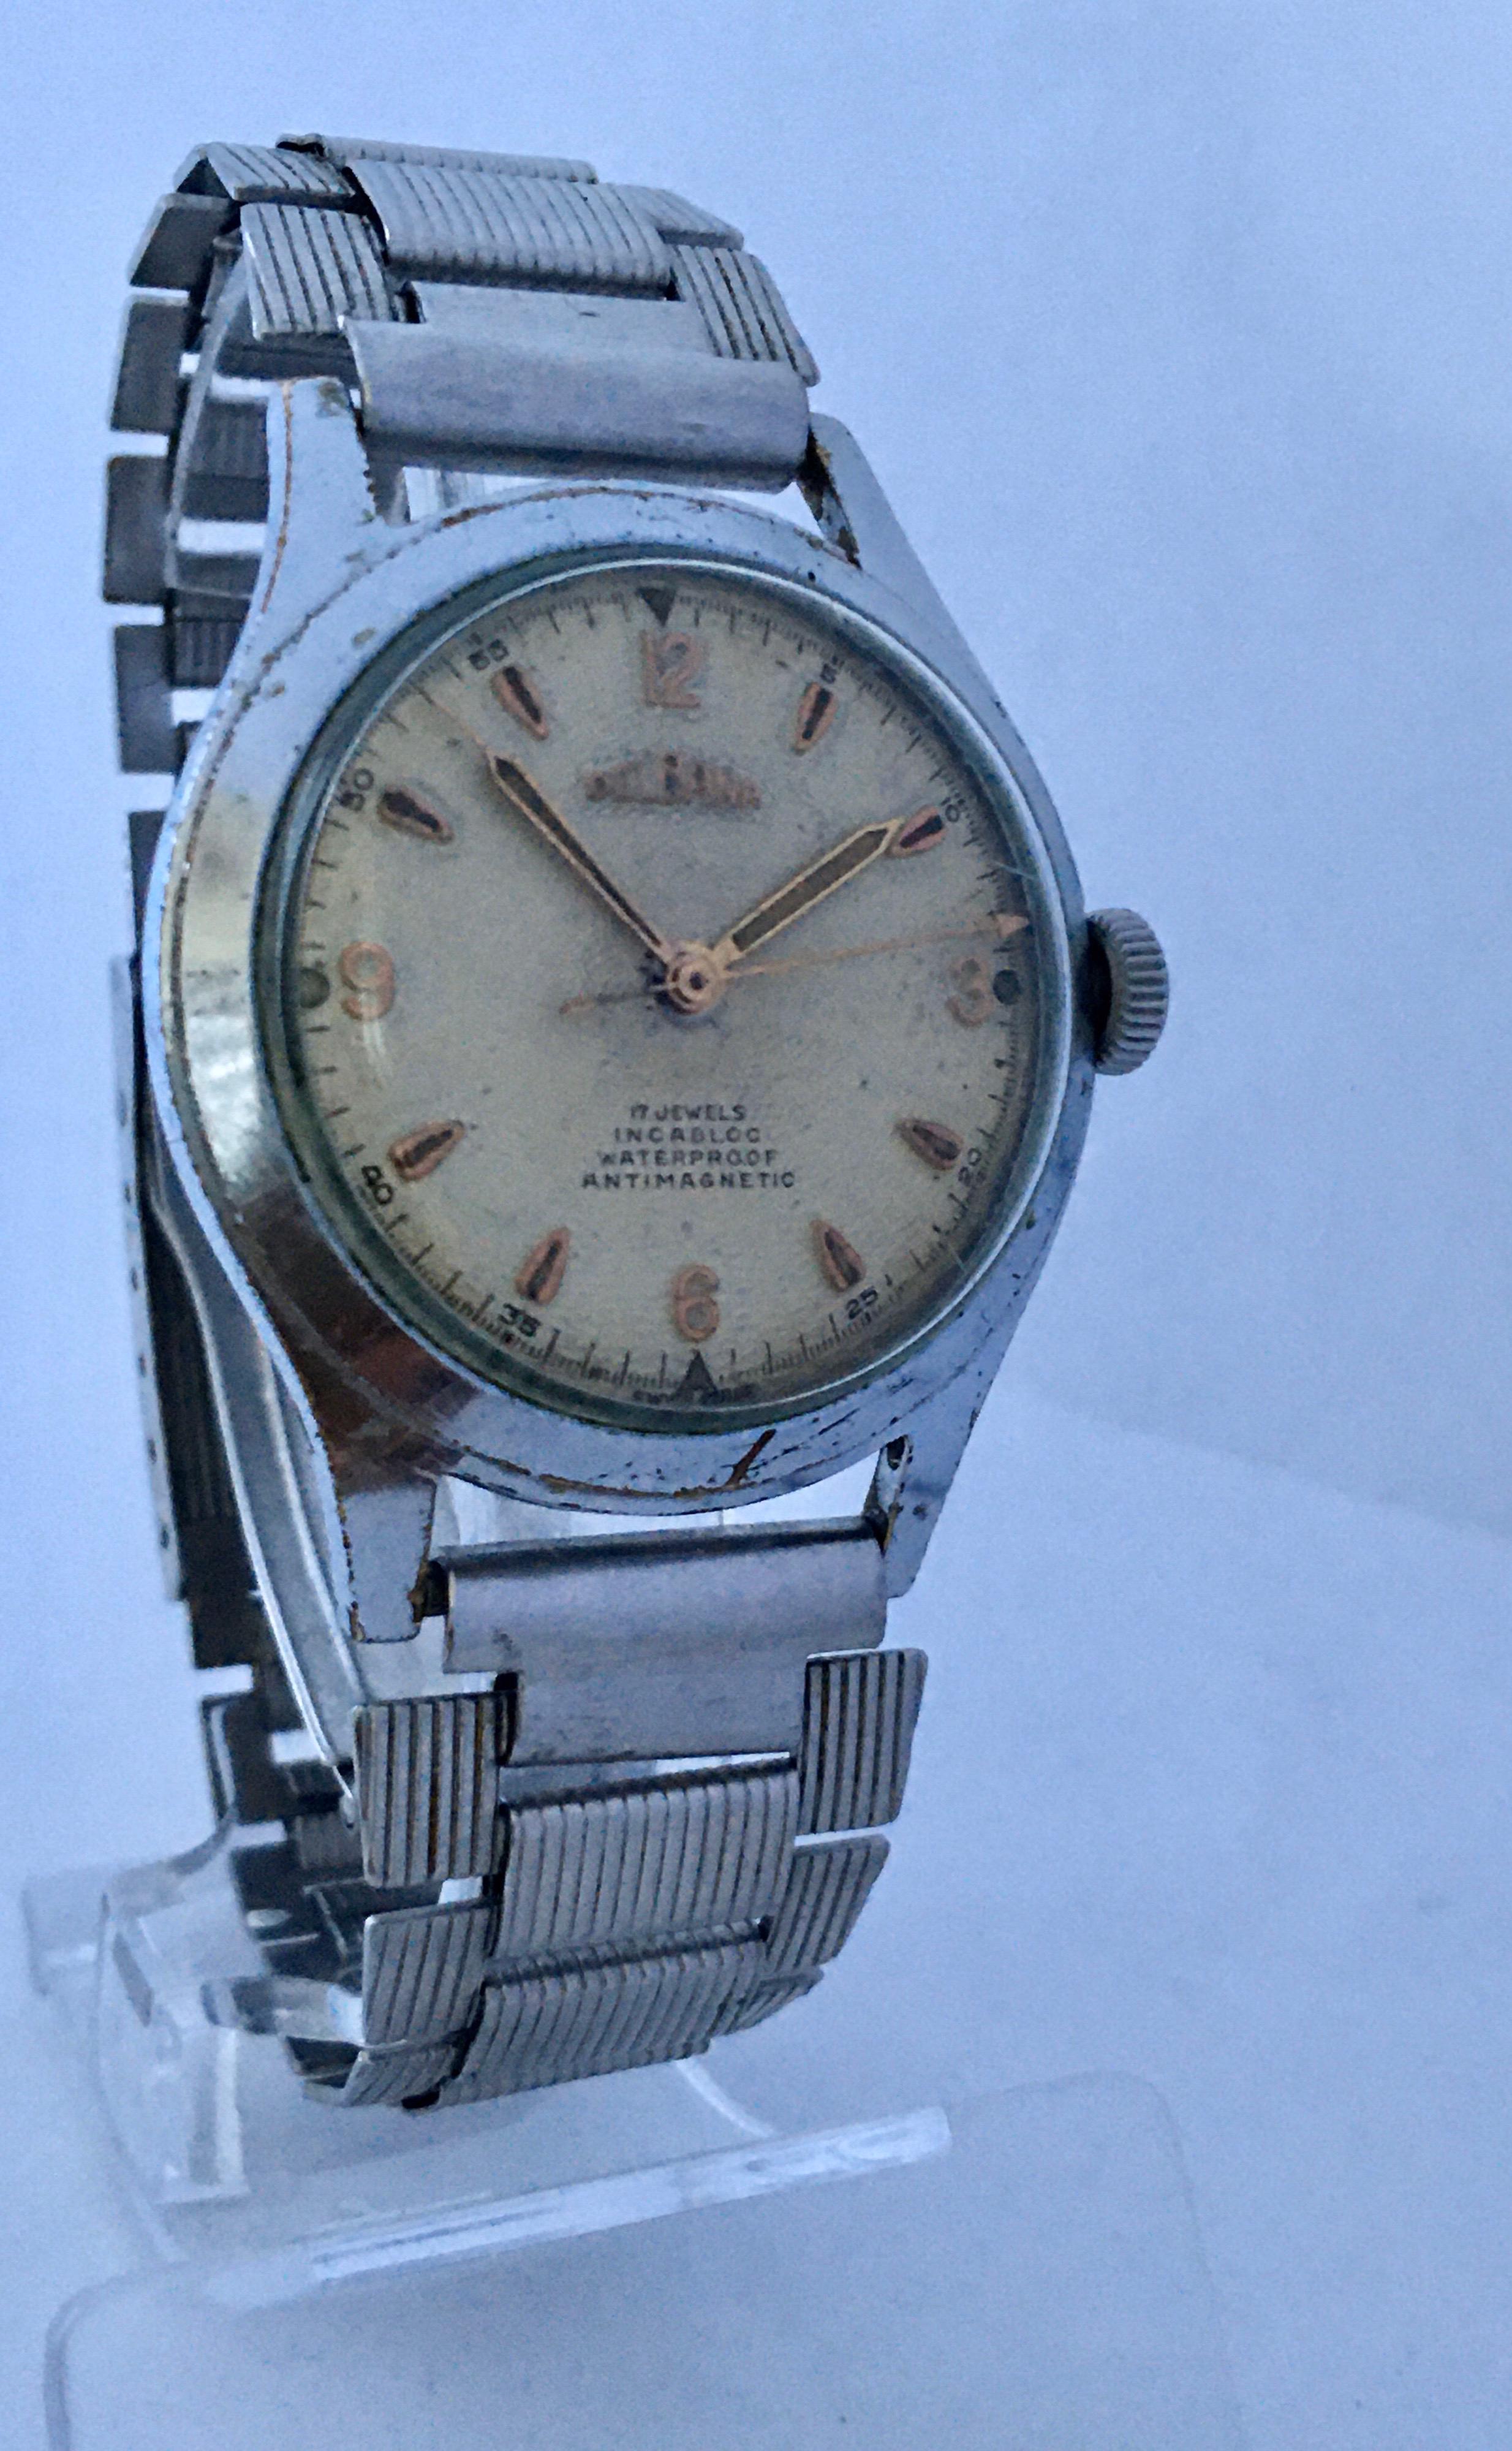 This beautiful pre-owned vintage manual winding watch is working and it is ticking and runs well. Visible signs of ageing and wear with some scratches on the watch case, glass  and on the strap. There are some worn and slight tarnish on watch case